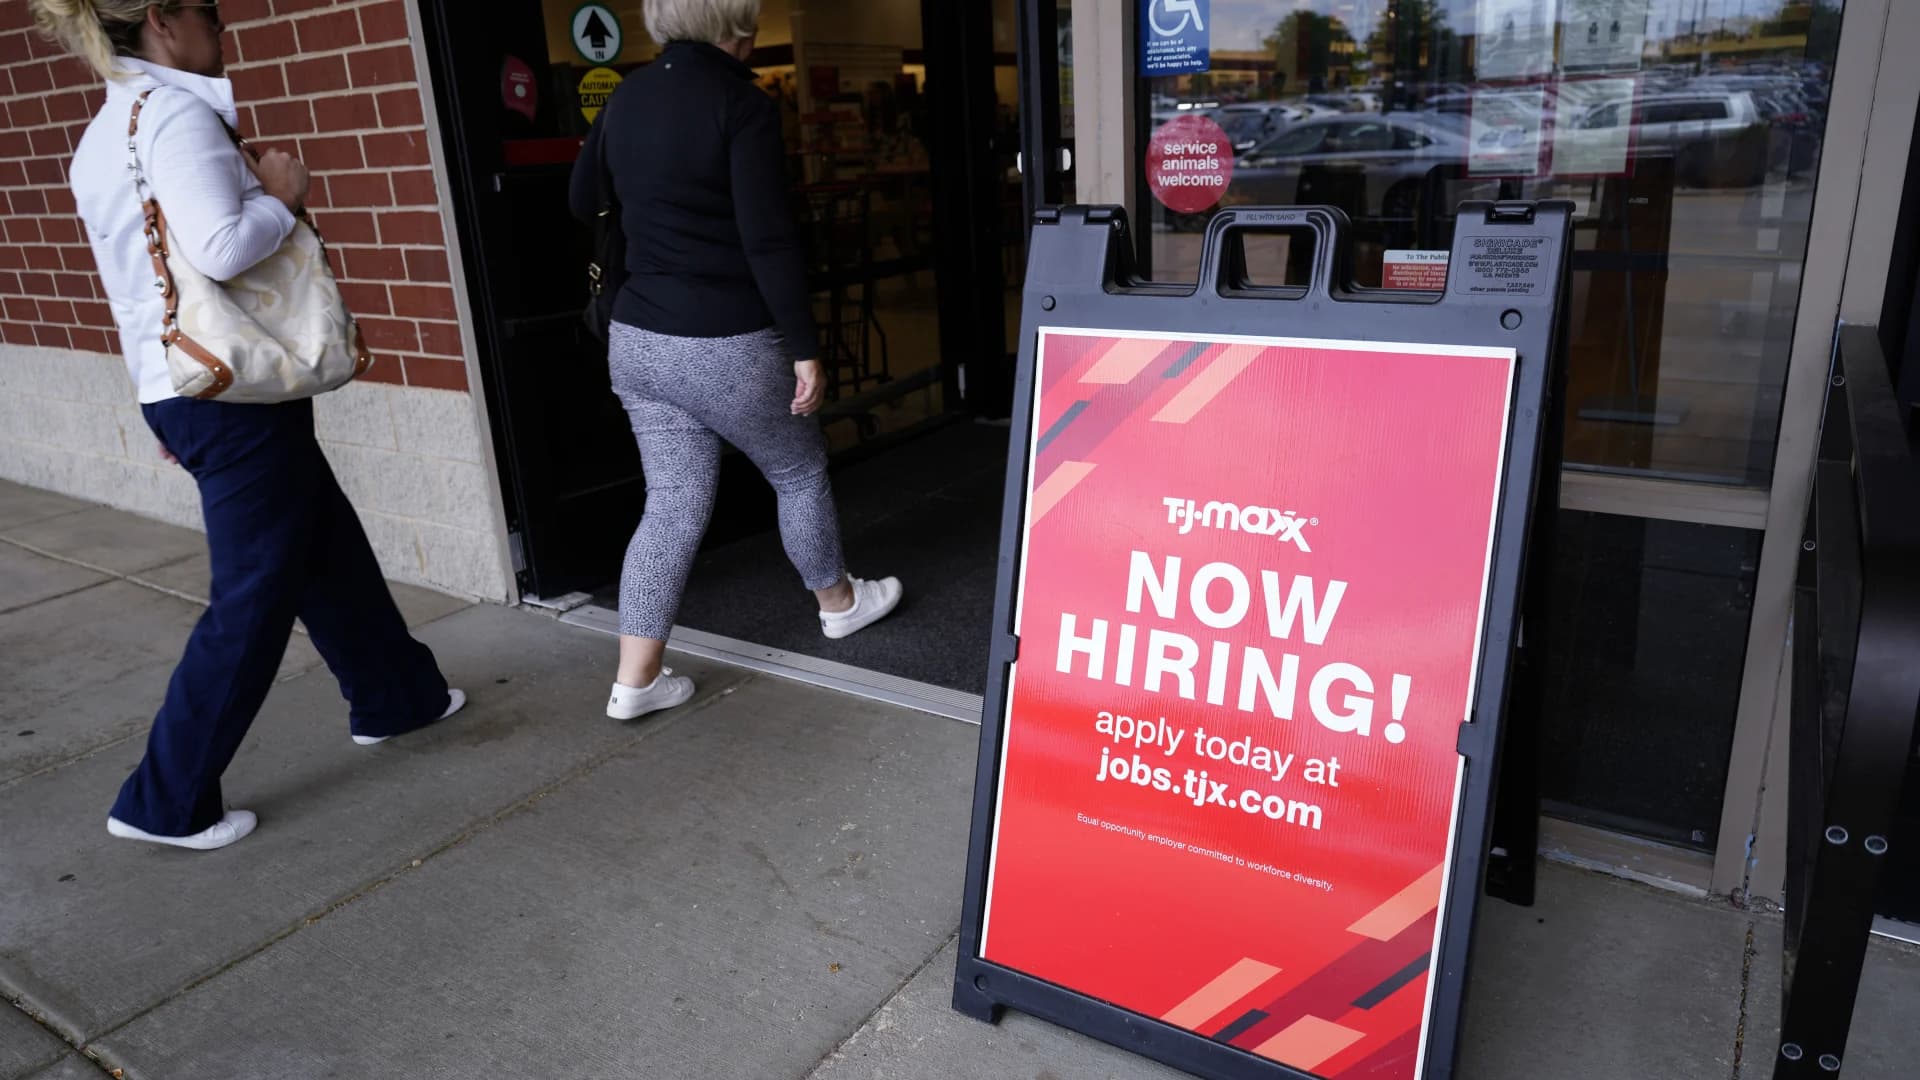 Weekly US applications for jobless benefits slide to lowest level in 5 months